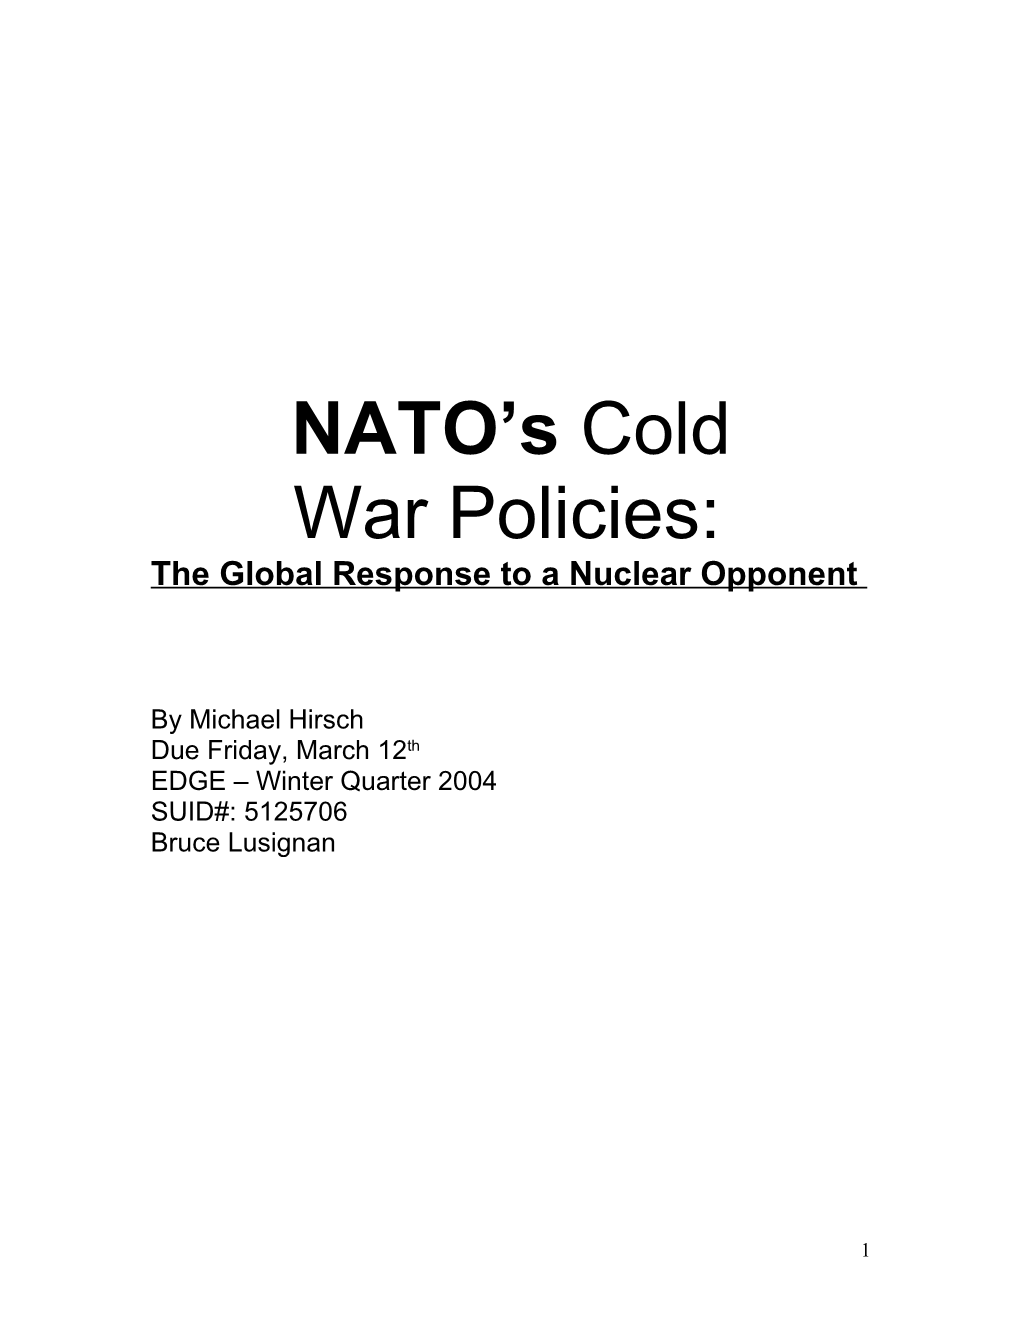 An Analysis of the Nuclear Strategies of NATO in the Cold War